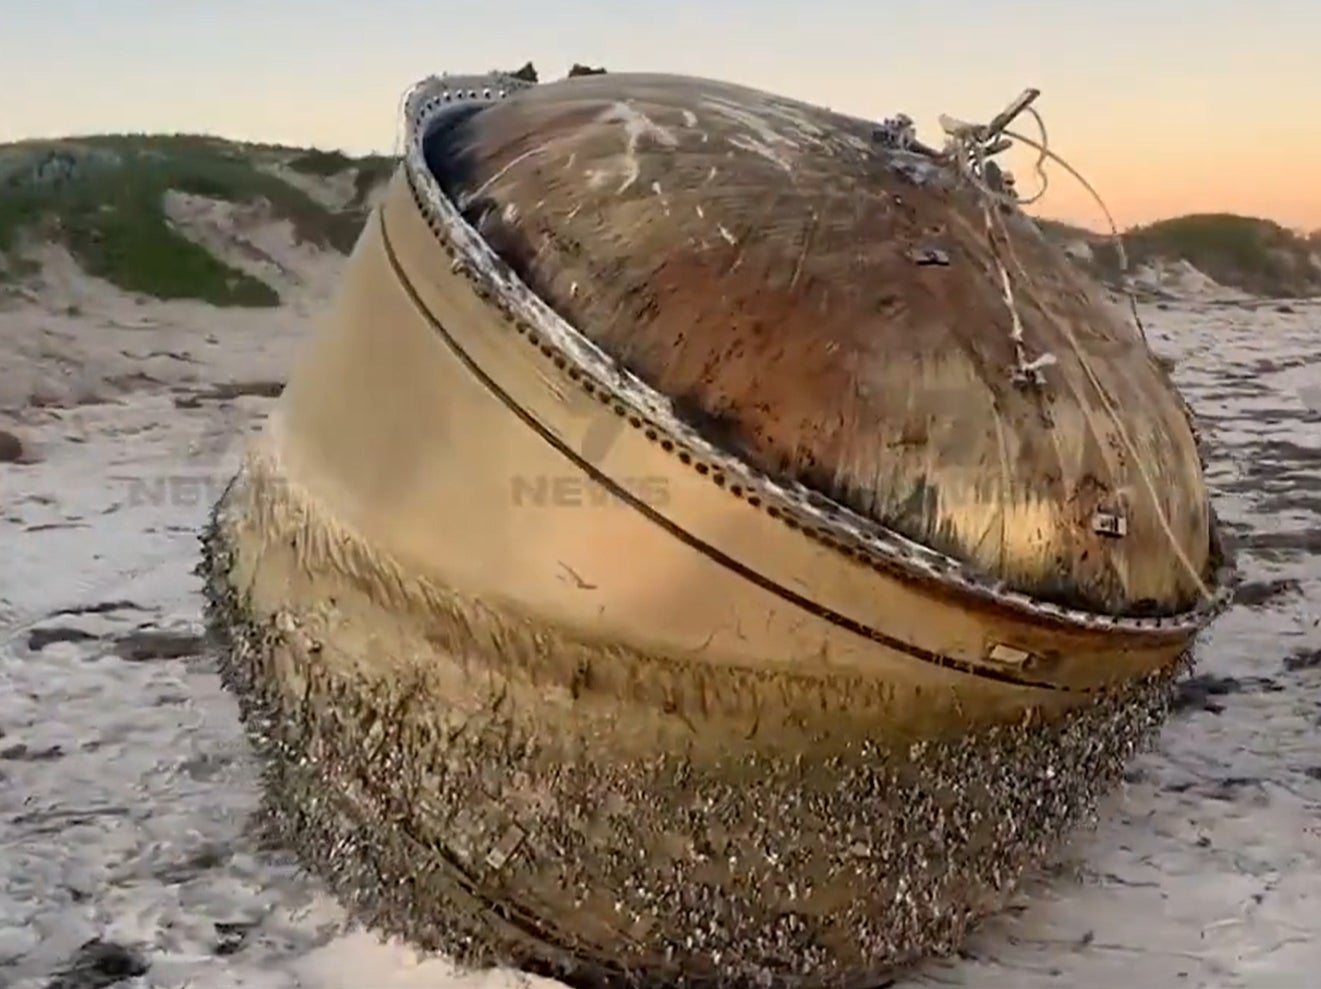 The mysterious giant cylinder washed up on an Australian beach